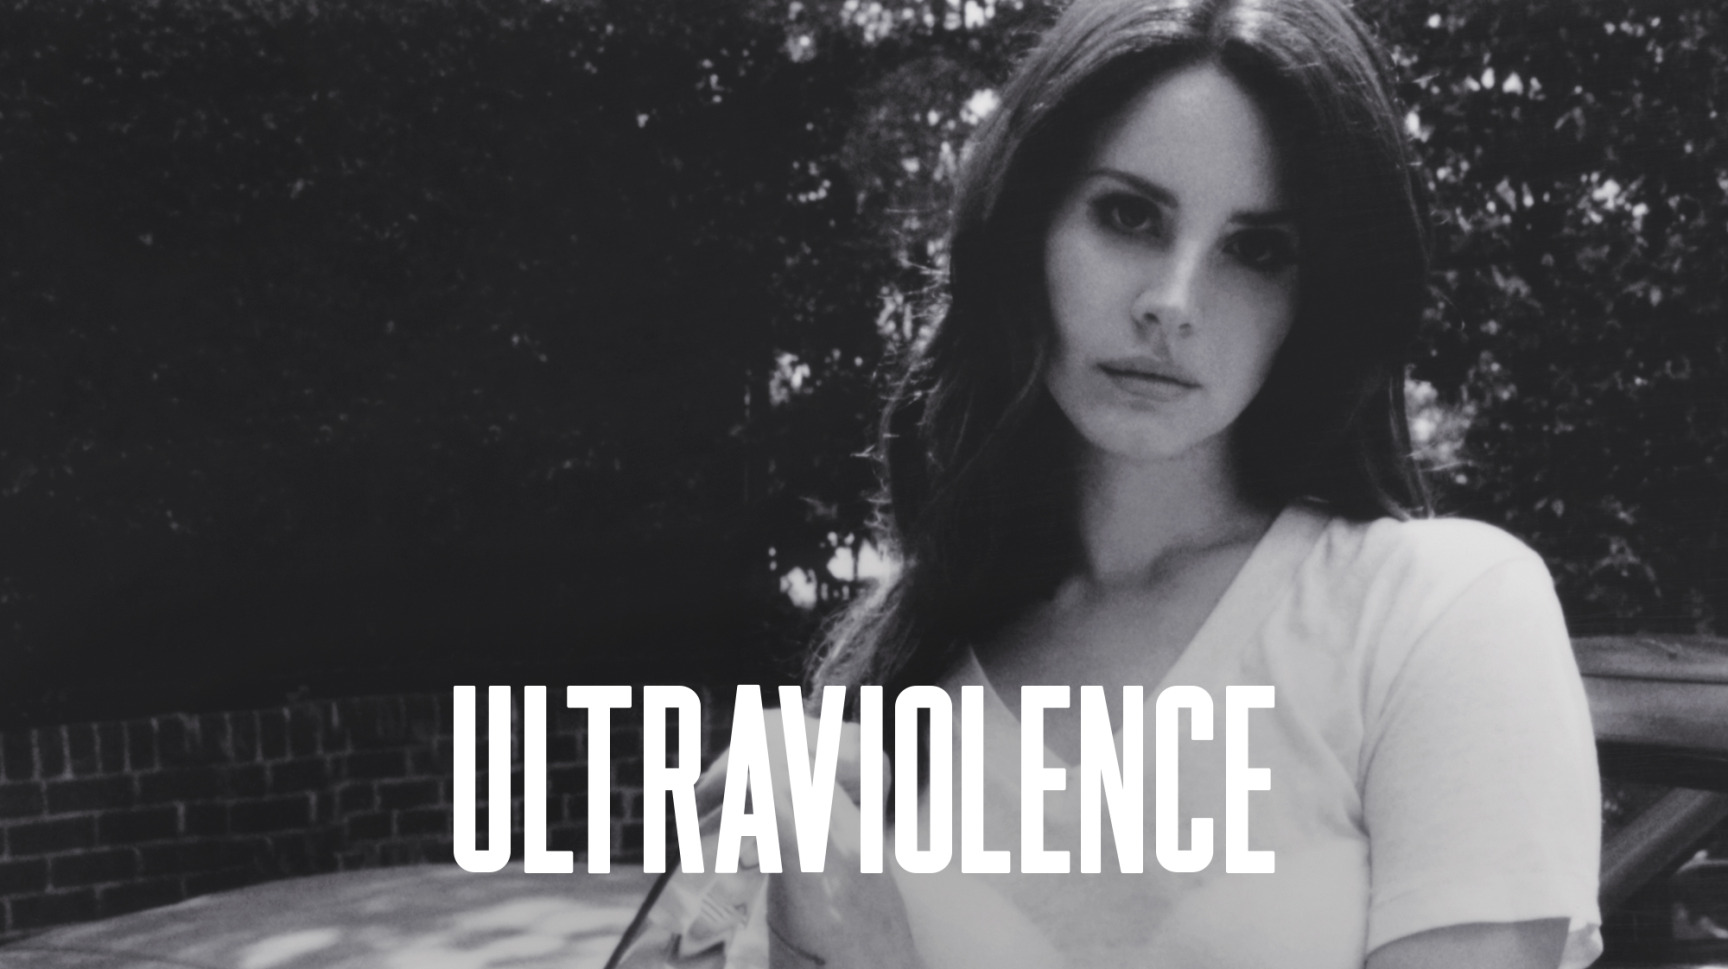 Music<br /><strong>Lana Del Rey</strong>